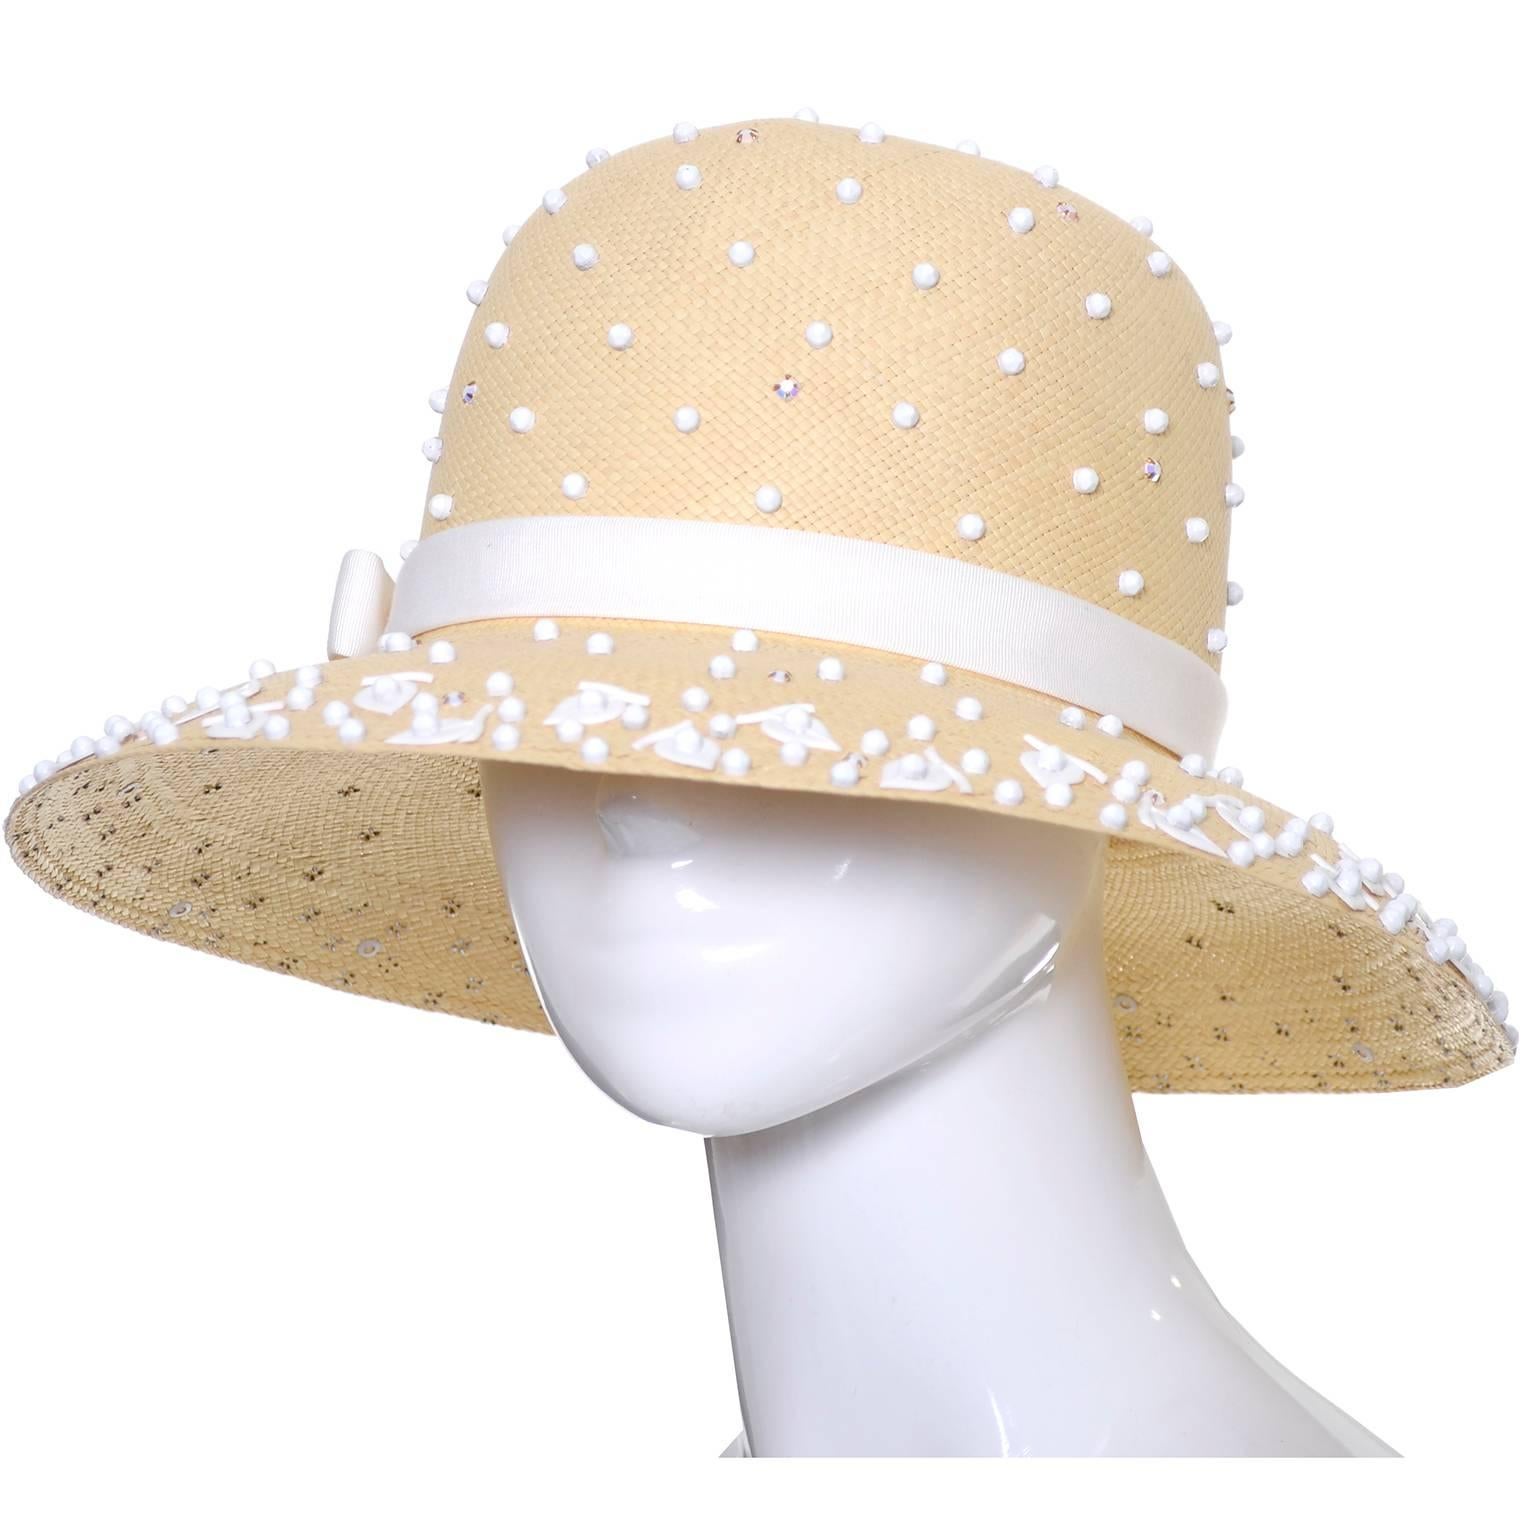 This dead stock Kurt Jr. vintage hat was designed by Tom Hann and still has both its manufacturer tag and Nordstrom price tag attached!  The hat is from the 1960's and sold for $50 at Nordstrom at the time!  This fine straw hat is beaded with